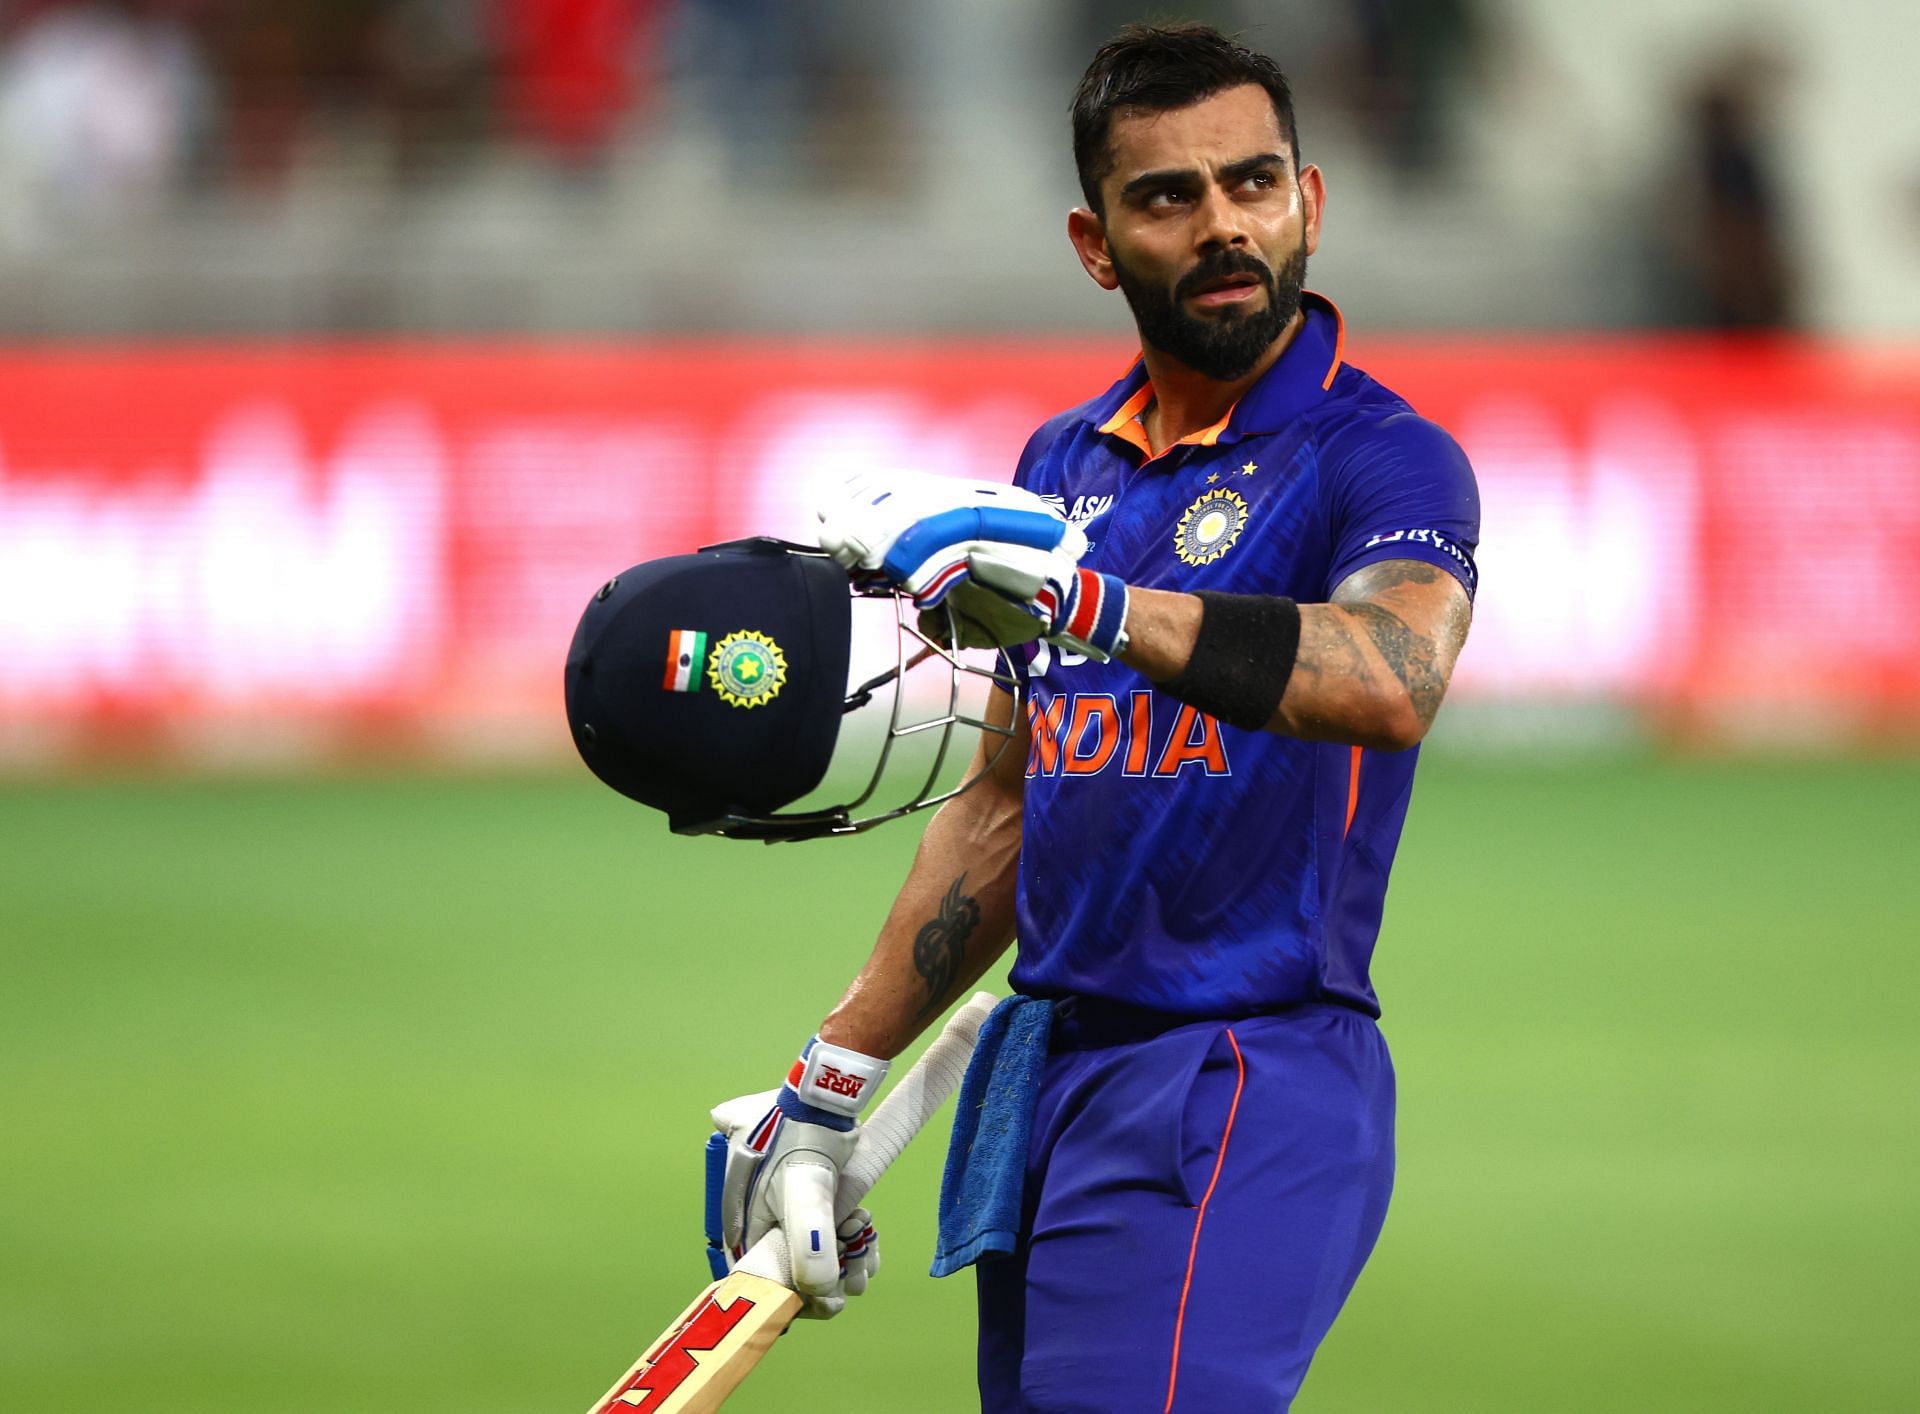 Virat Kohli looked out of sorts before he took a break ahead of the Asia Cup.